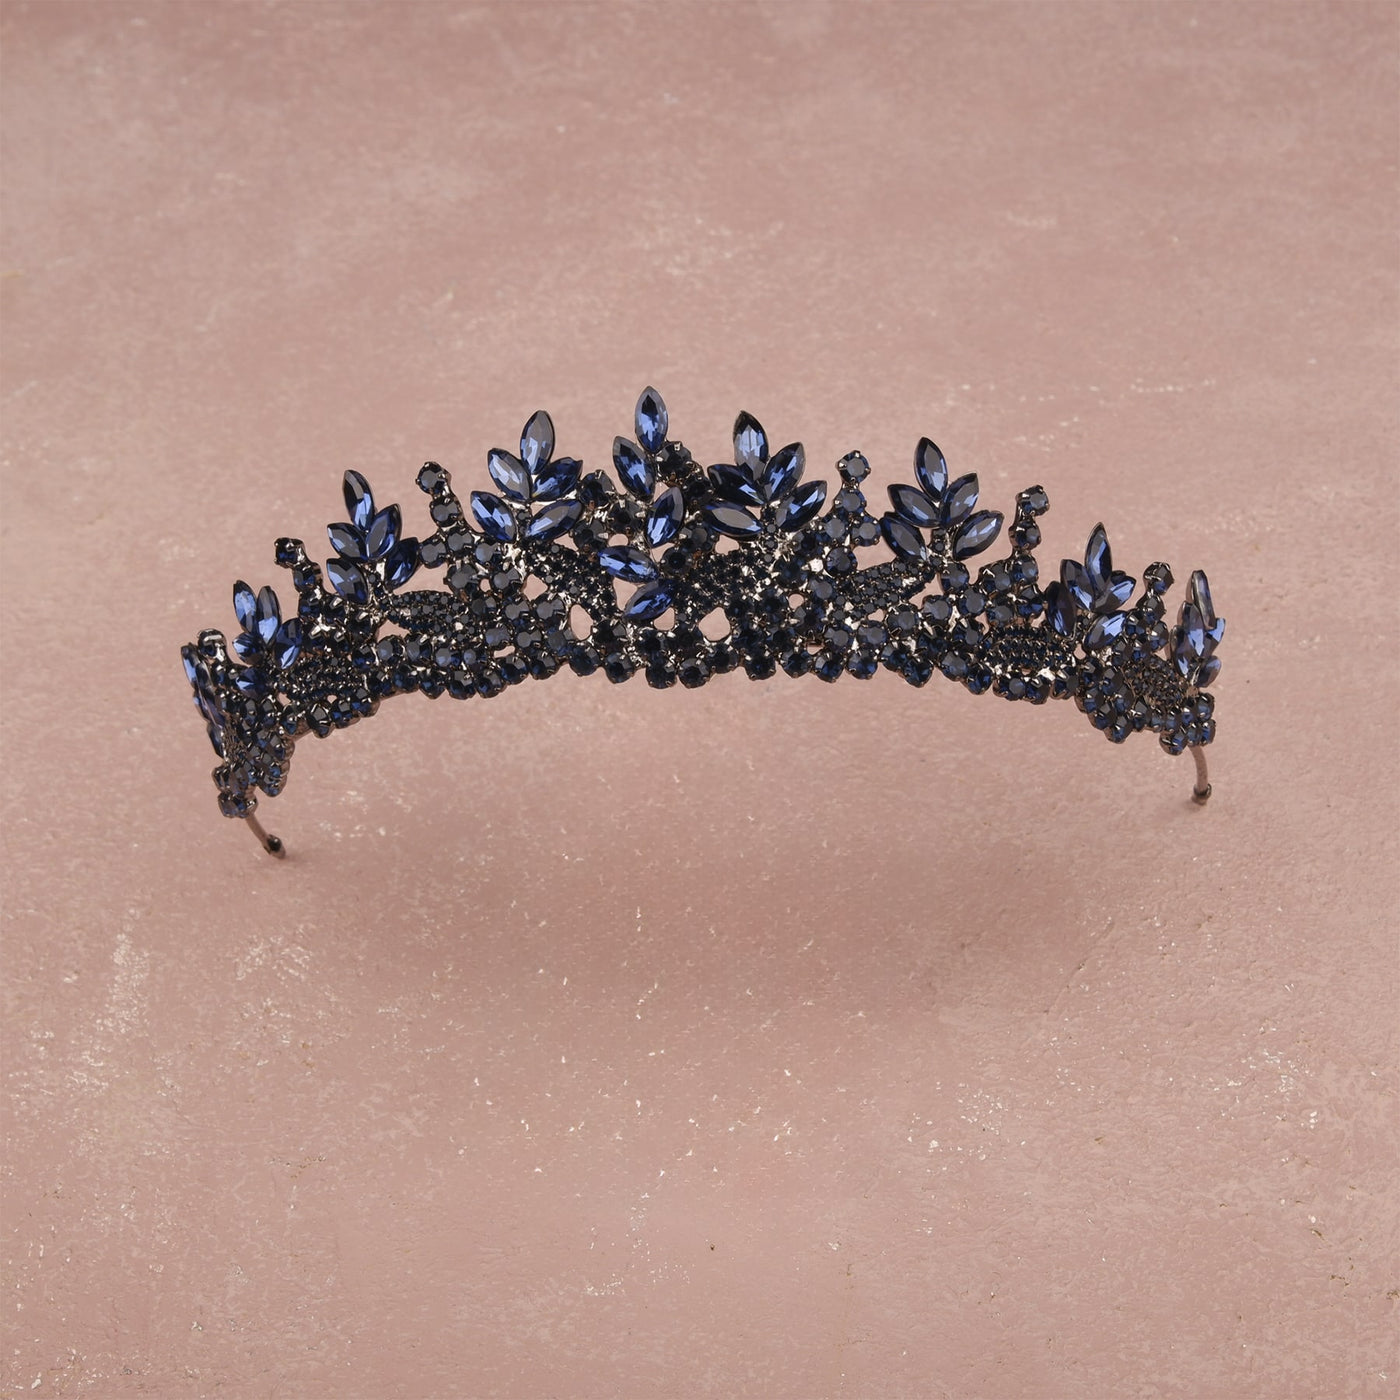 Crystal-Embellished Bridal Wedding Crown, Princess Tiara for Special Days and Parties